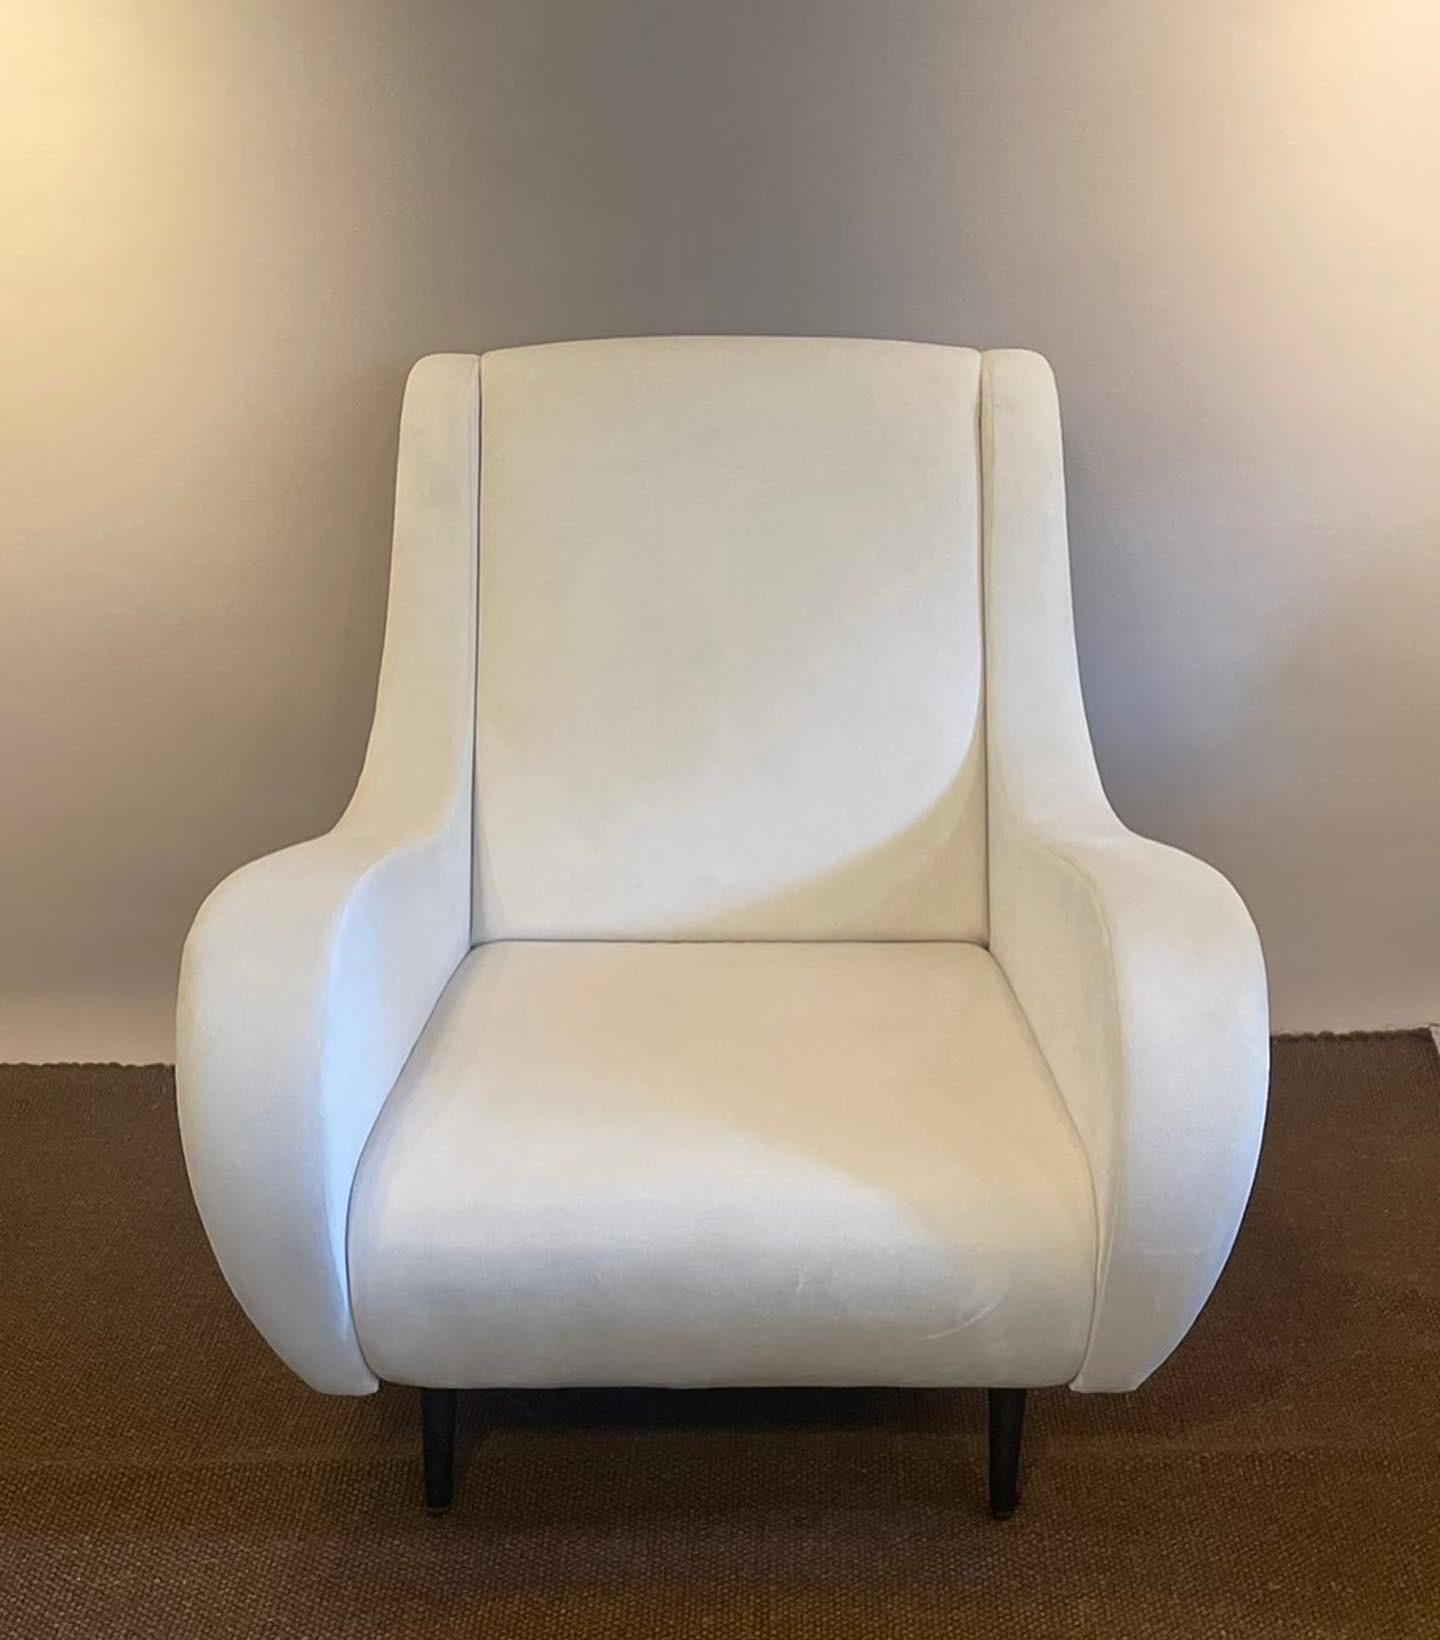 This lounge chair is a brand new and produced in Tokyo.
The upholstery fabric can be chosen from KINGHAM RELOADED made by CHIVASSO Italy. 
The ottoman is also available.